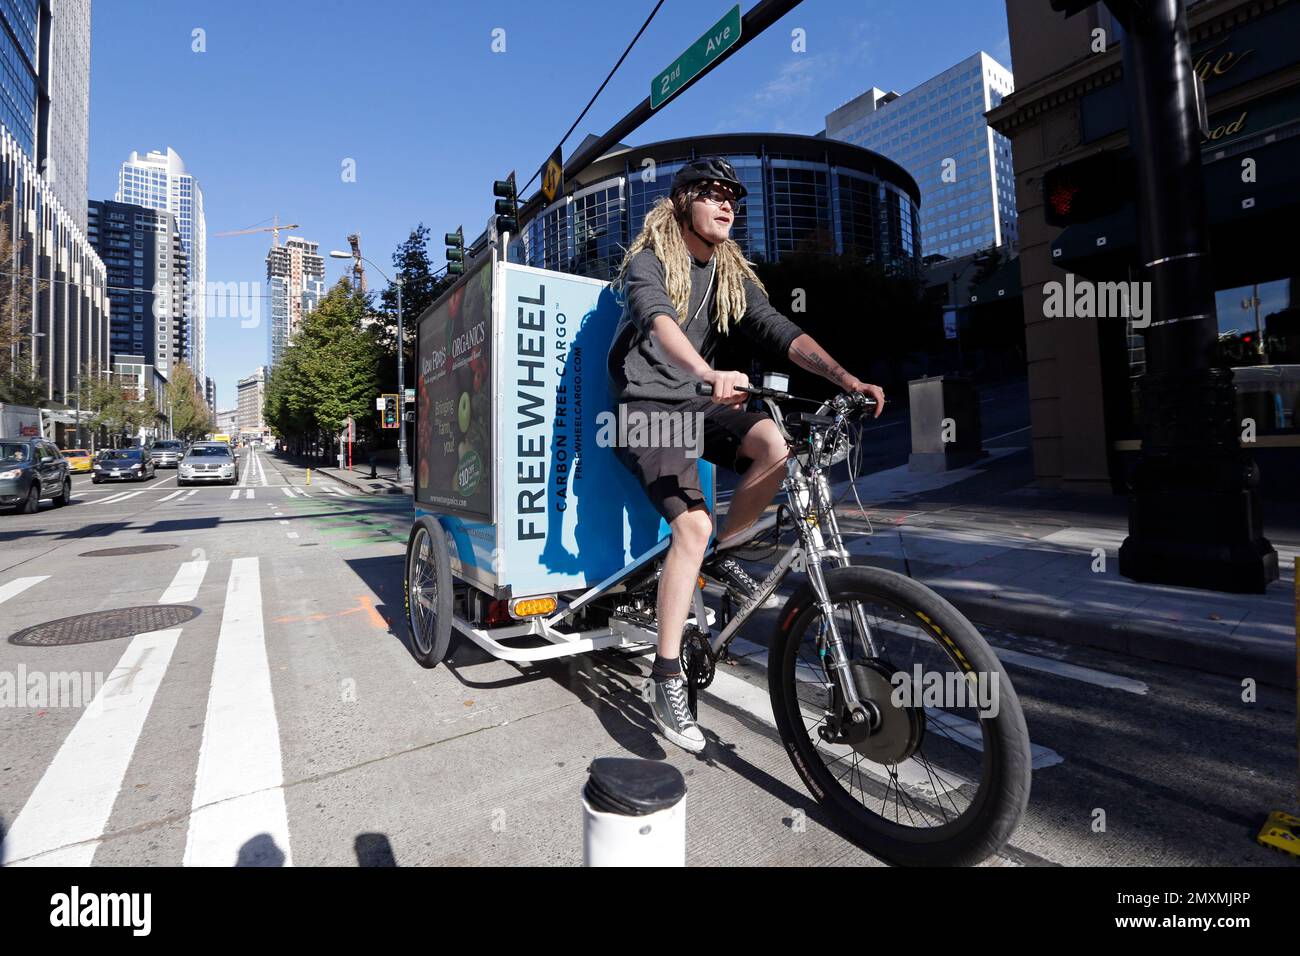 Cargo bike delivery driver Jesse Erickson wheels through a bicycle-only lane on a downtown street Wednesday, Oct